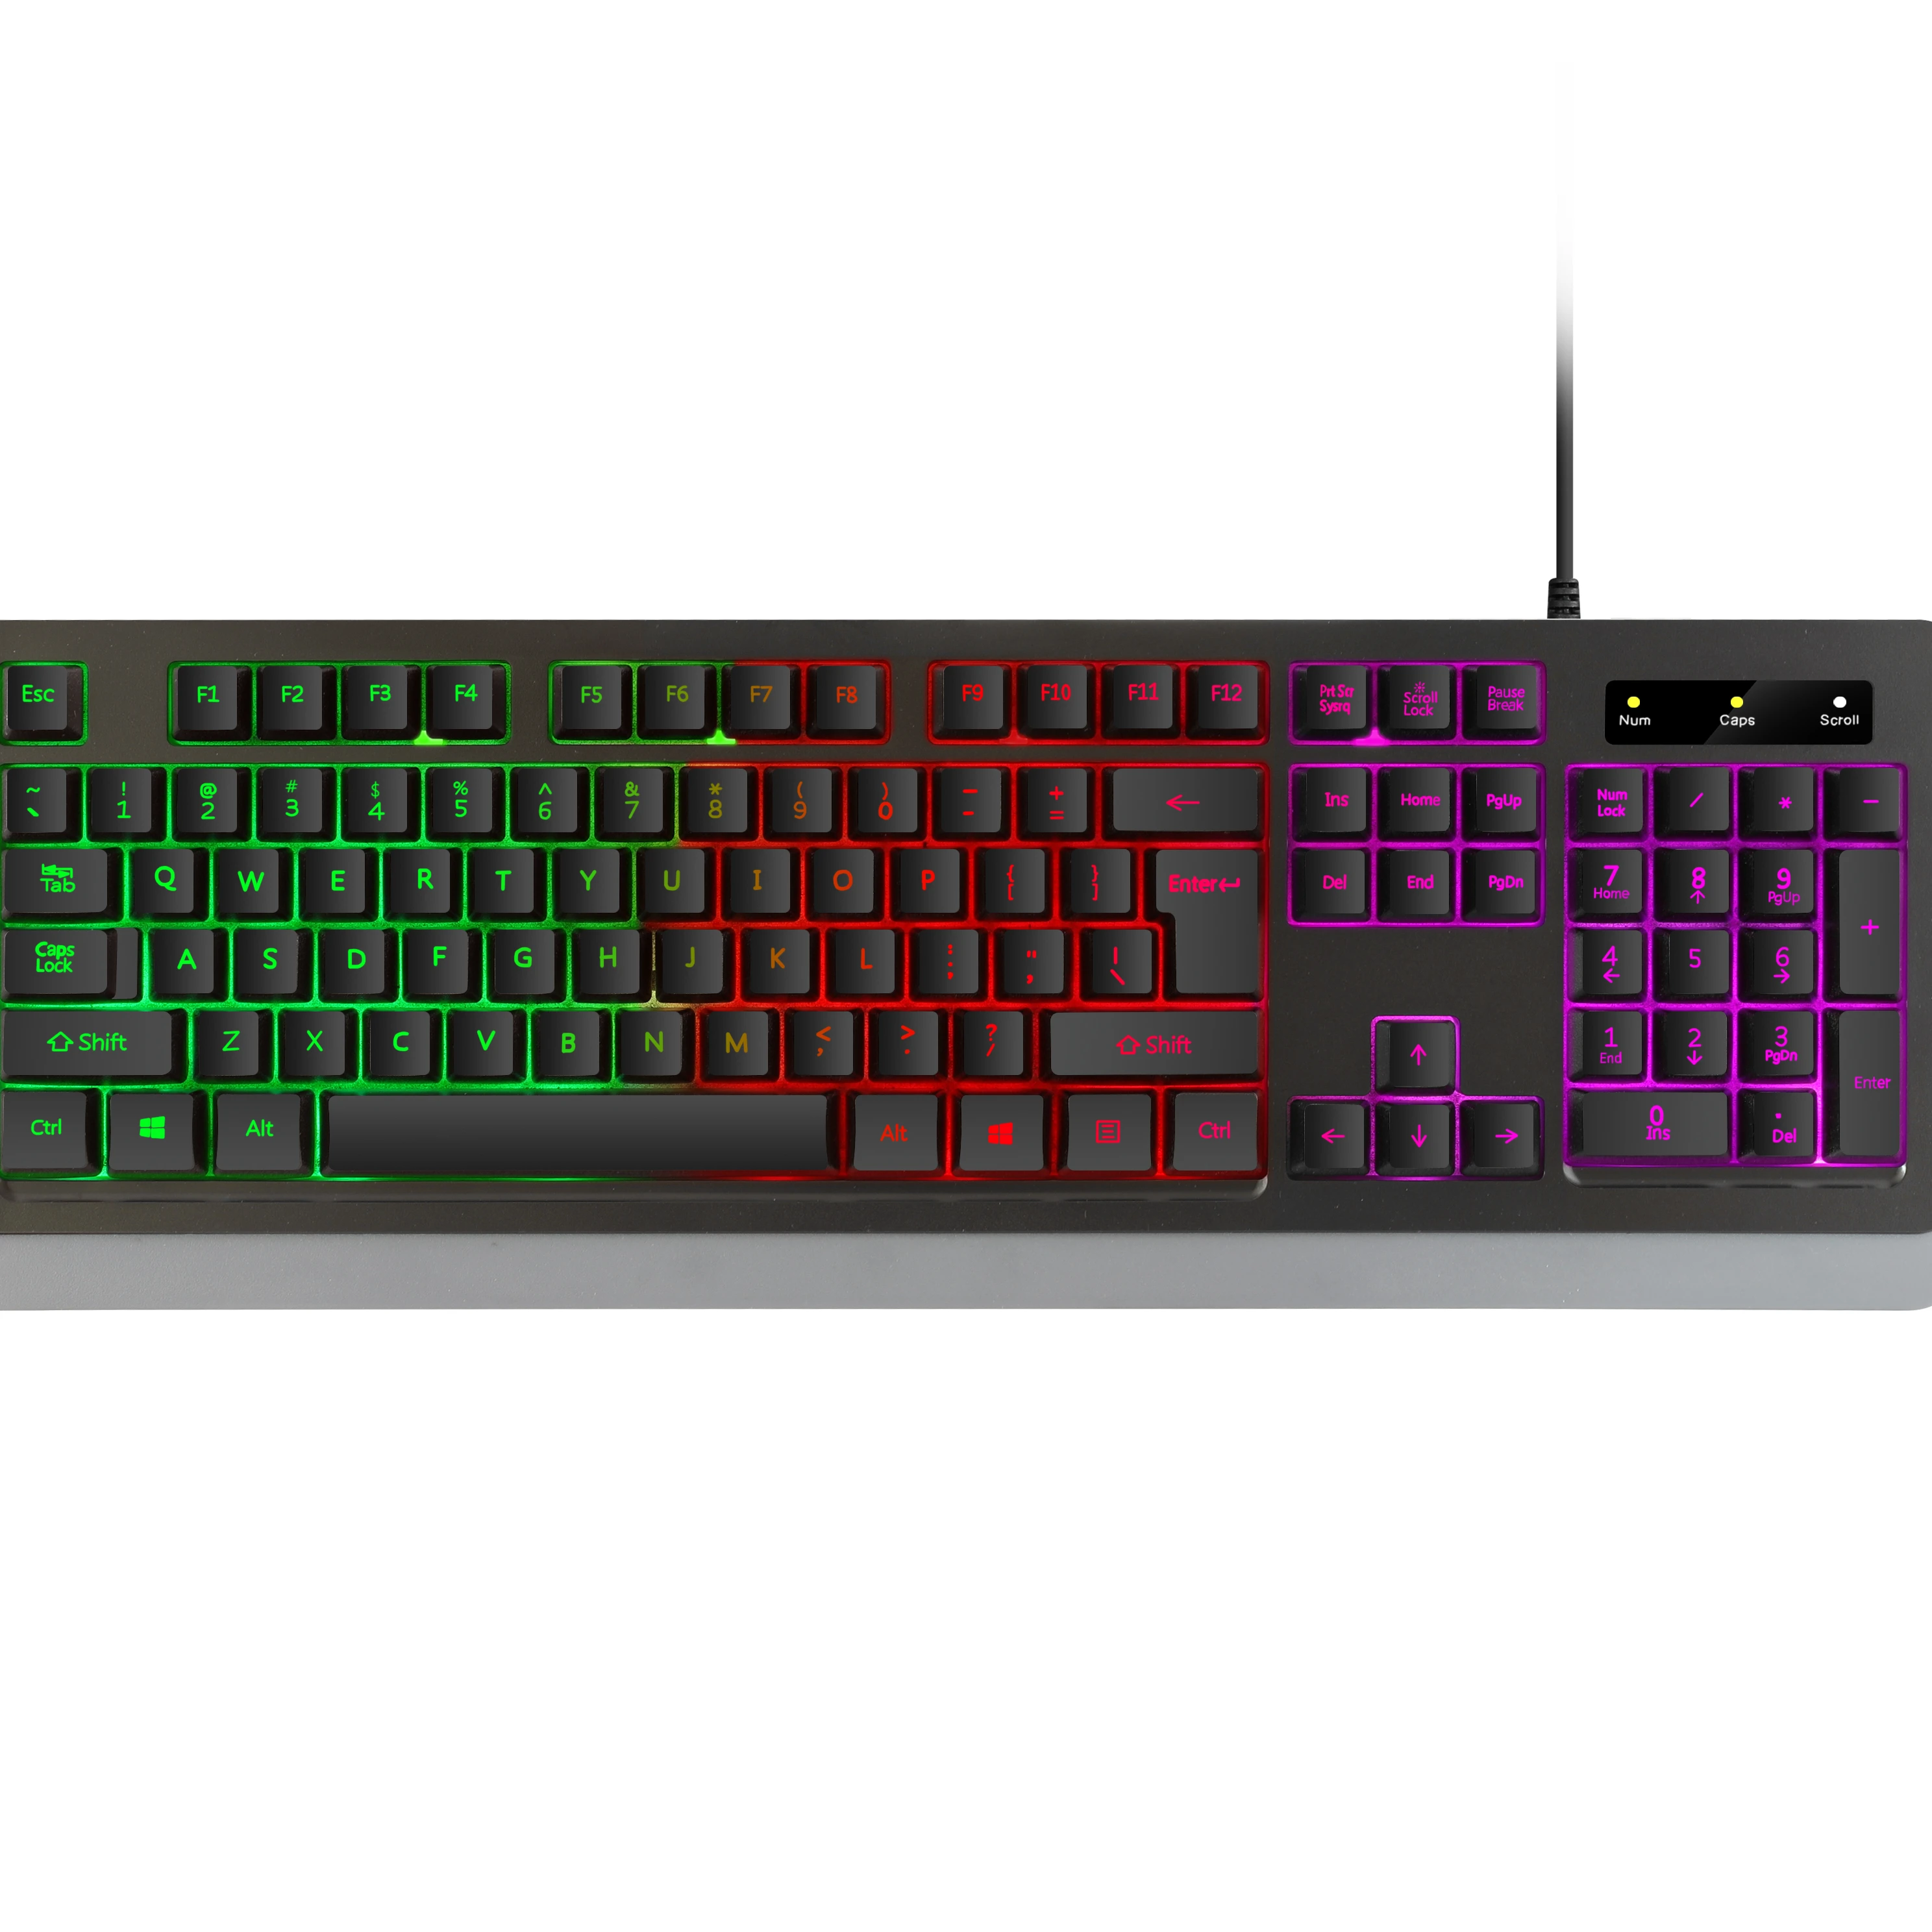 

Wholesales Wired USB PC gaming Mechanical RGB keyboard 104 keys game key board for laptop computer windows